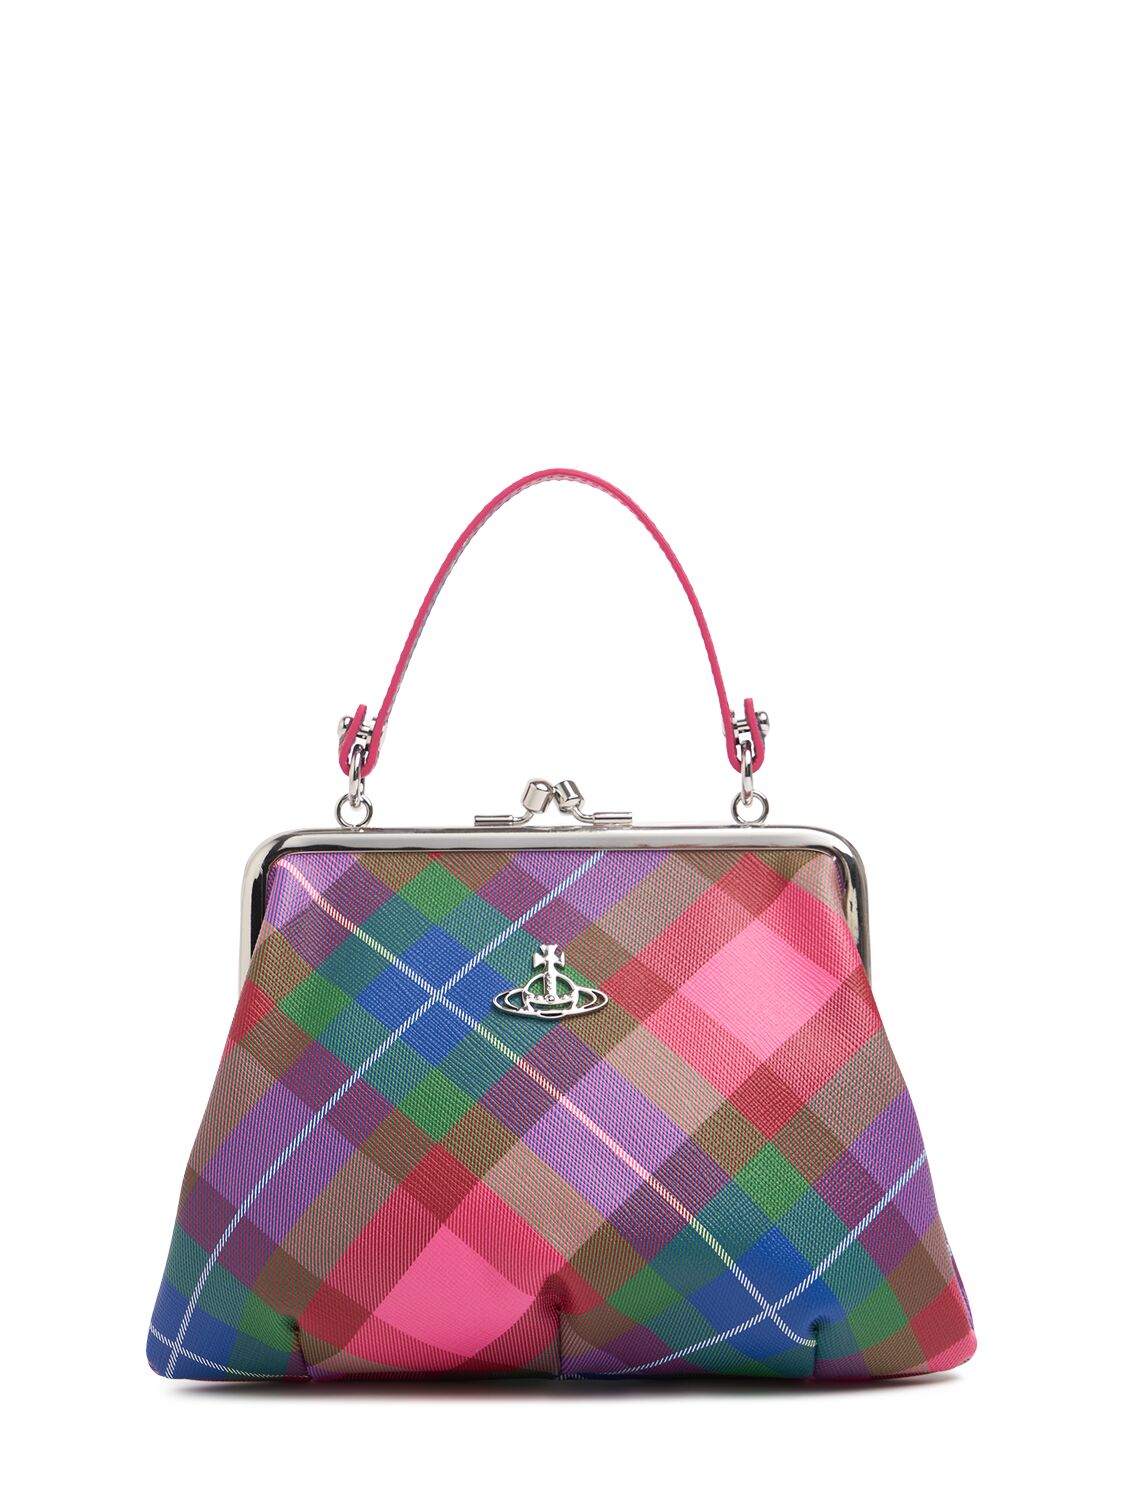 Vivienne Westwood Granny Frame Faux Leather Bag In Candy Tartan